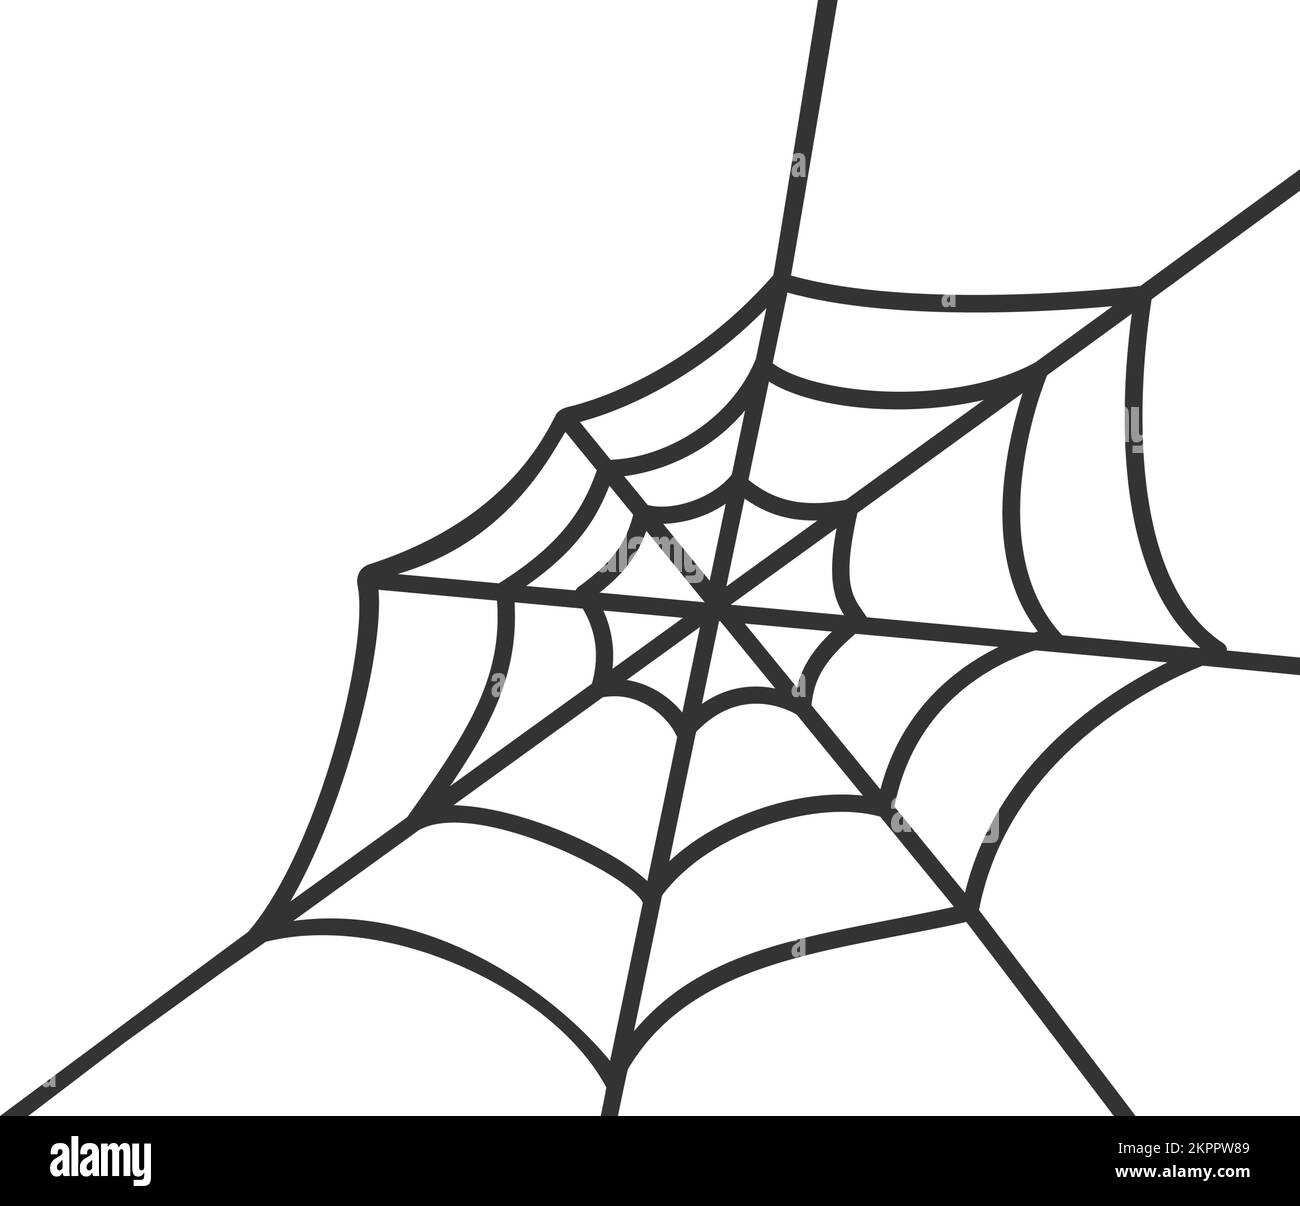 Cobweb in corner isolated on white background. Hand drawn spider web texture. Halloween party design. Vector illustration in doodle style. Stock Vector